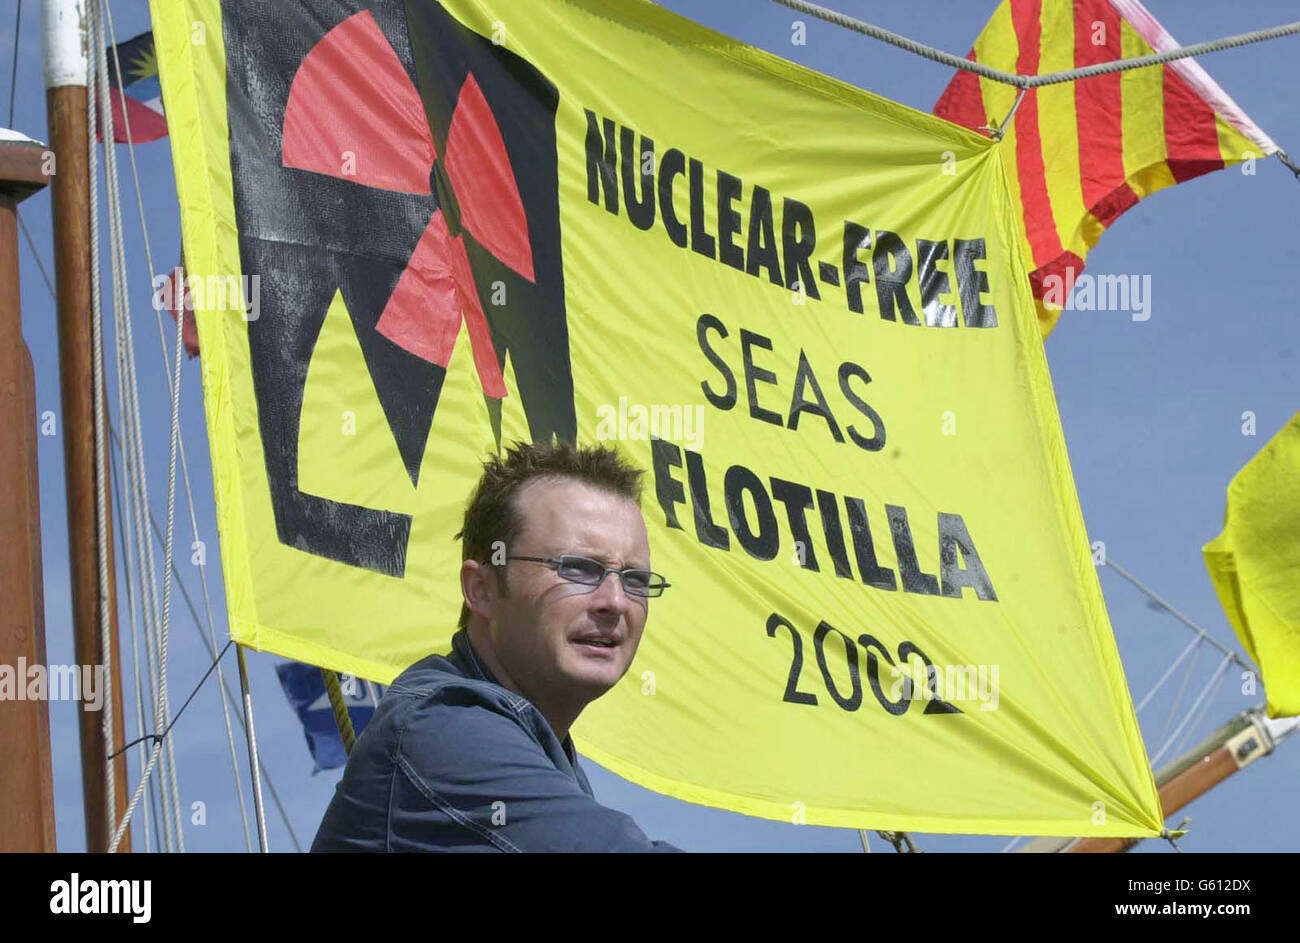 Irish musician Jim Corr shows his support for a flotilla of boats headed by the Greenpeace vessel Rainbow Warrior, as it leaves Dublin Harbou. The flotilla is protesting against a nuclear shipment bound for the Sellafield nuclear reprocessing plant in the UK, from Japan. *....A long line of celebrities including Bob Geldof and Ali Hewson, wife of U2 frontman Bono, have already campaigned against Sellafield and the nuclear shipment. Stock Photo